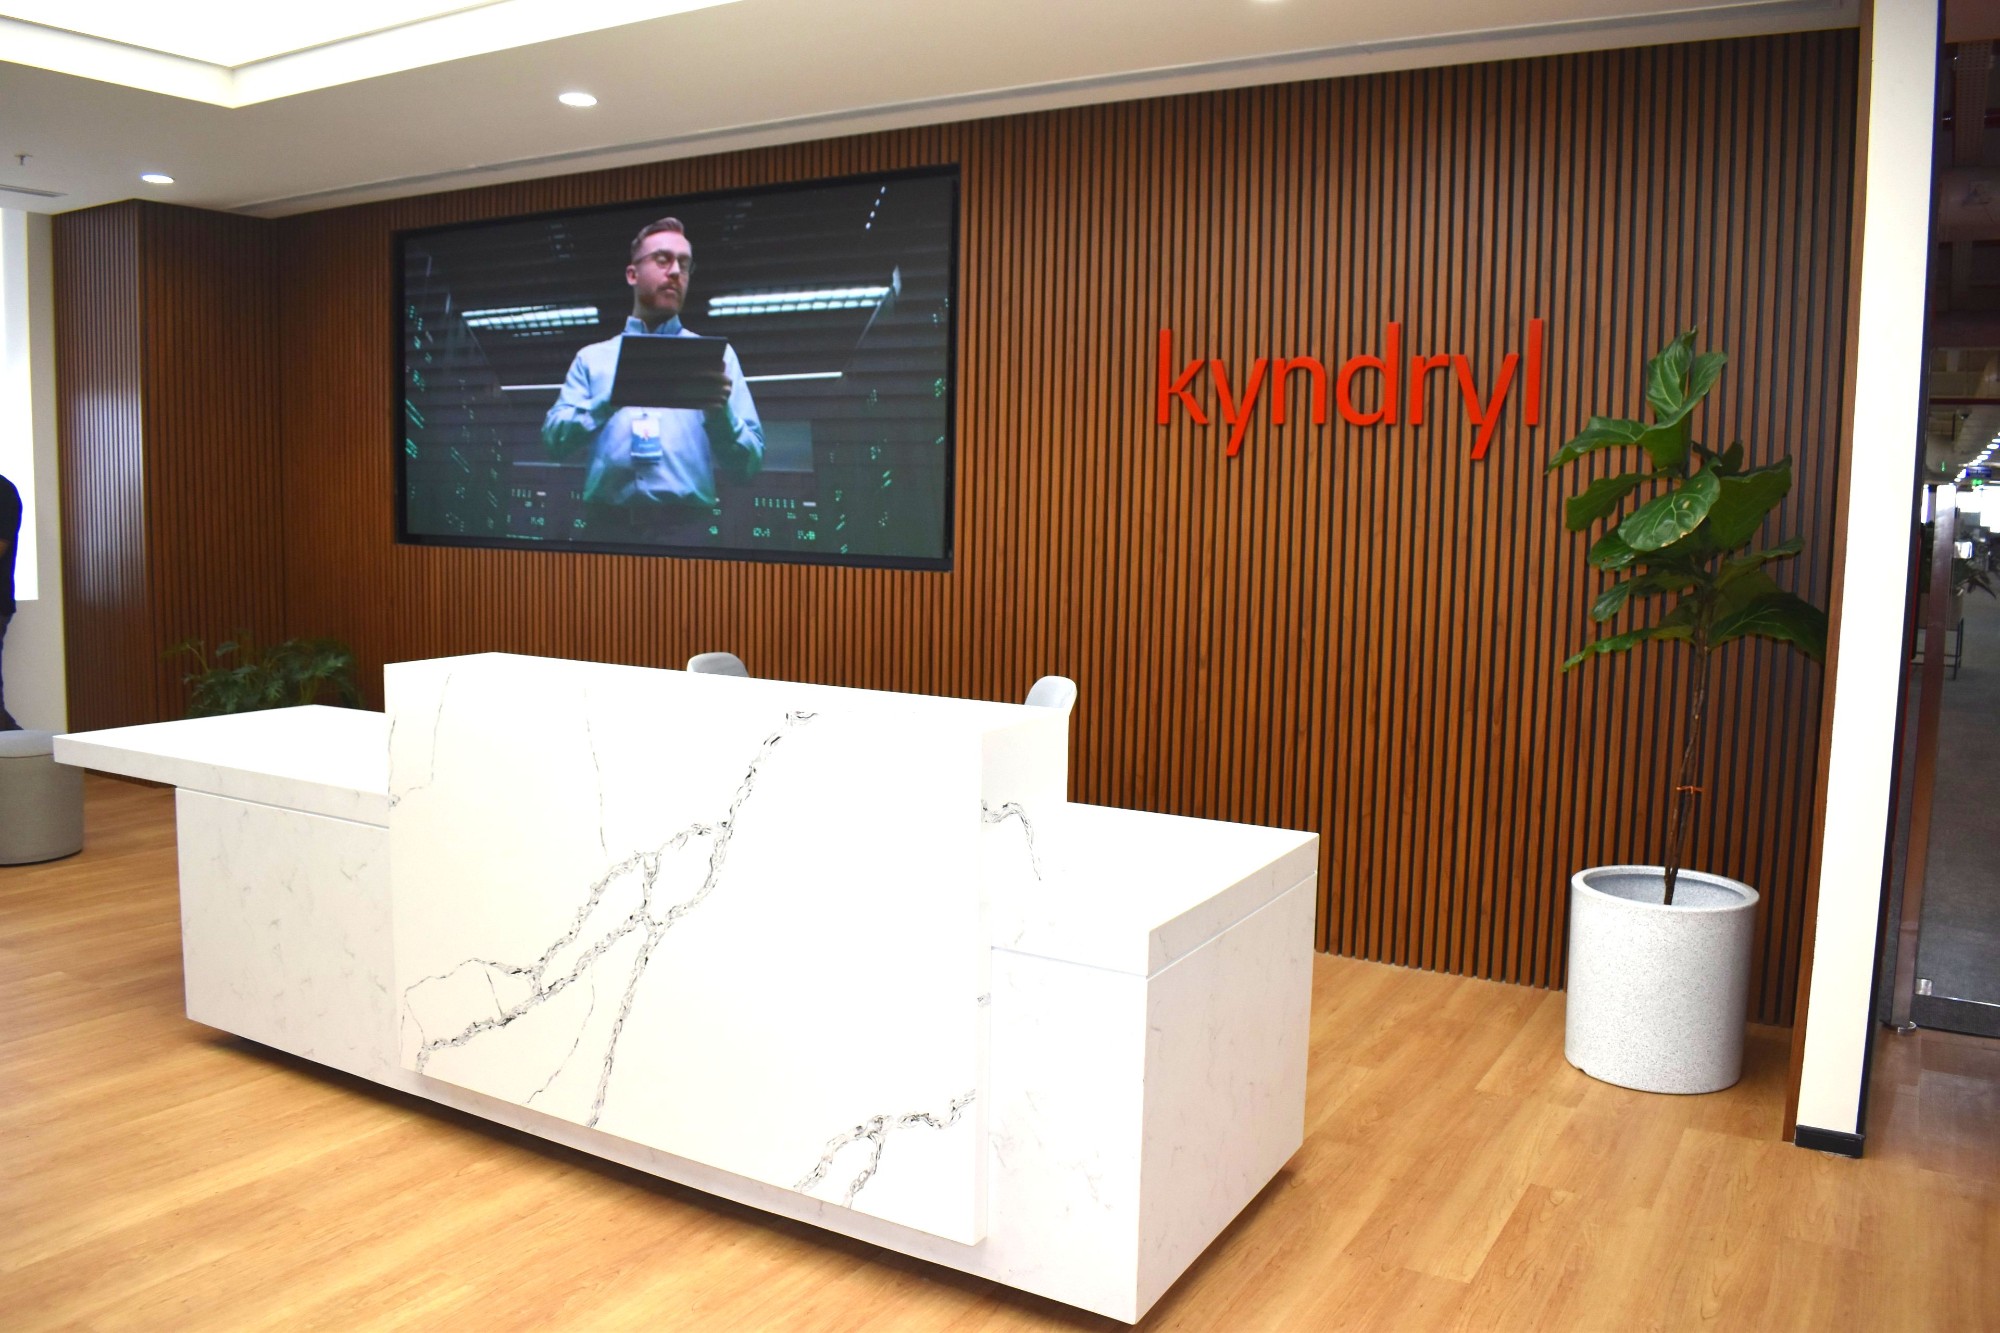 Kyndryl opens new office space in Bengaluru